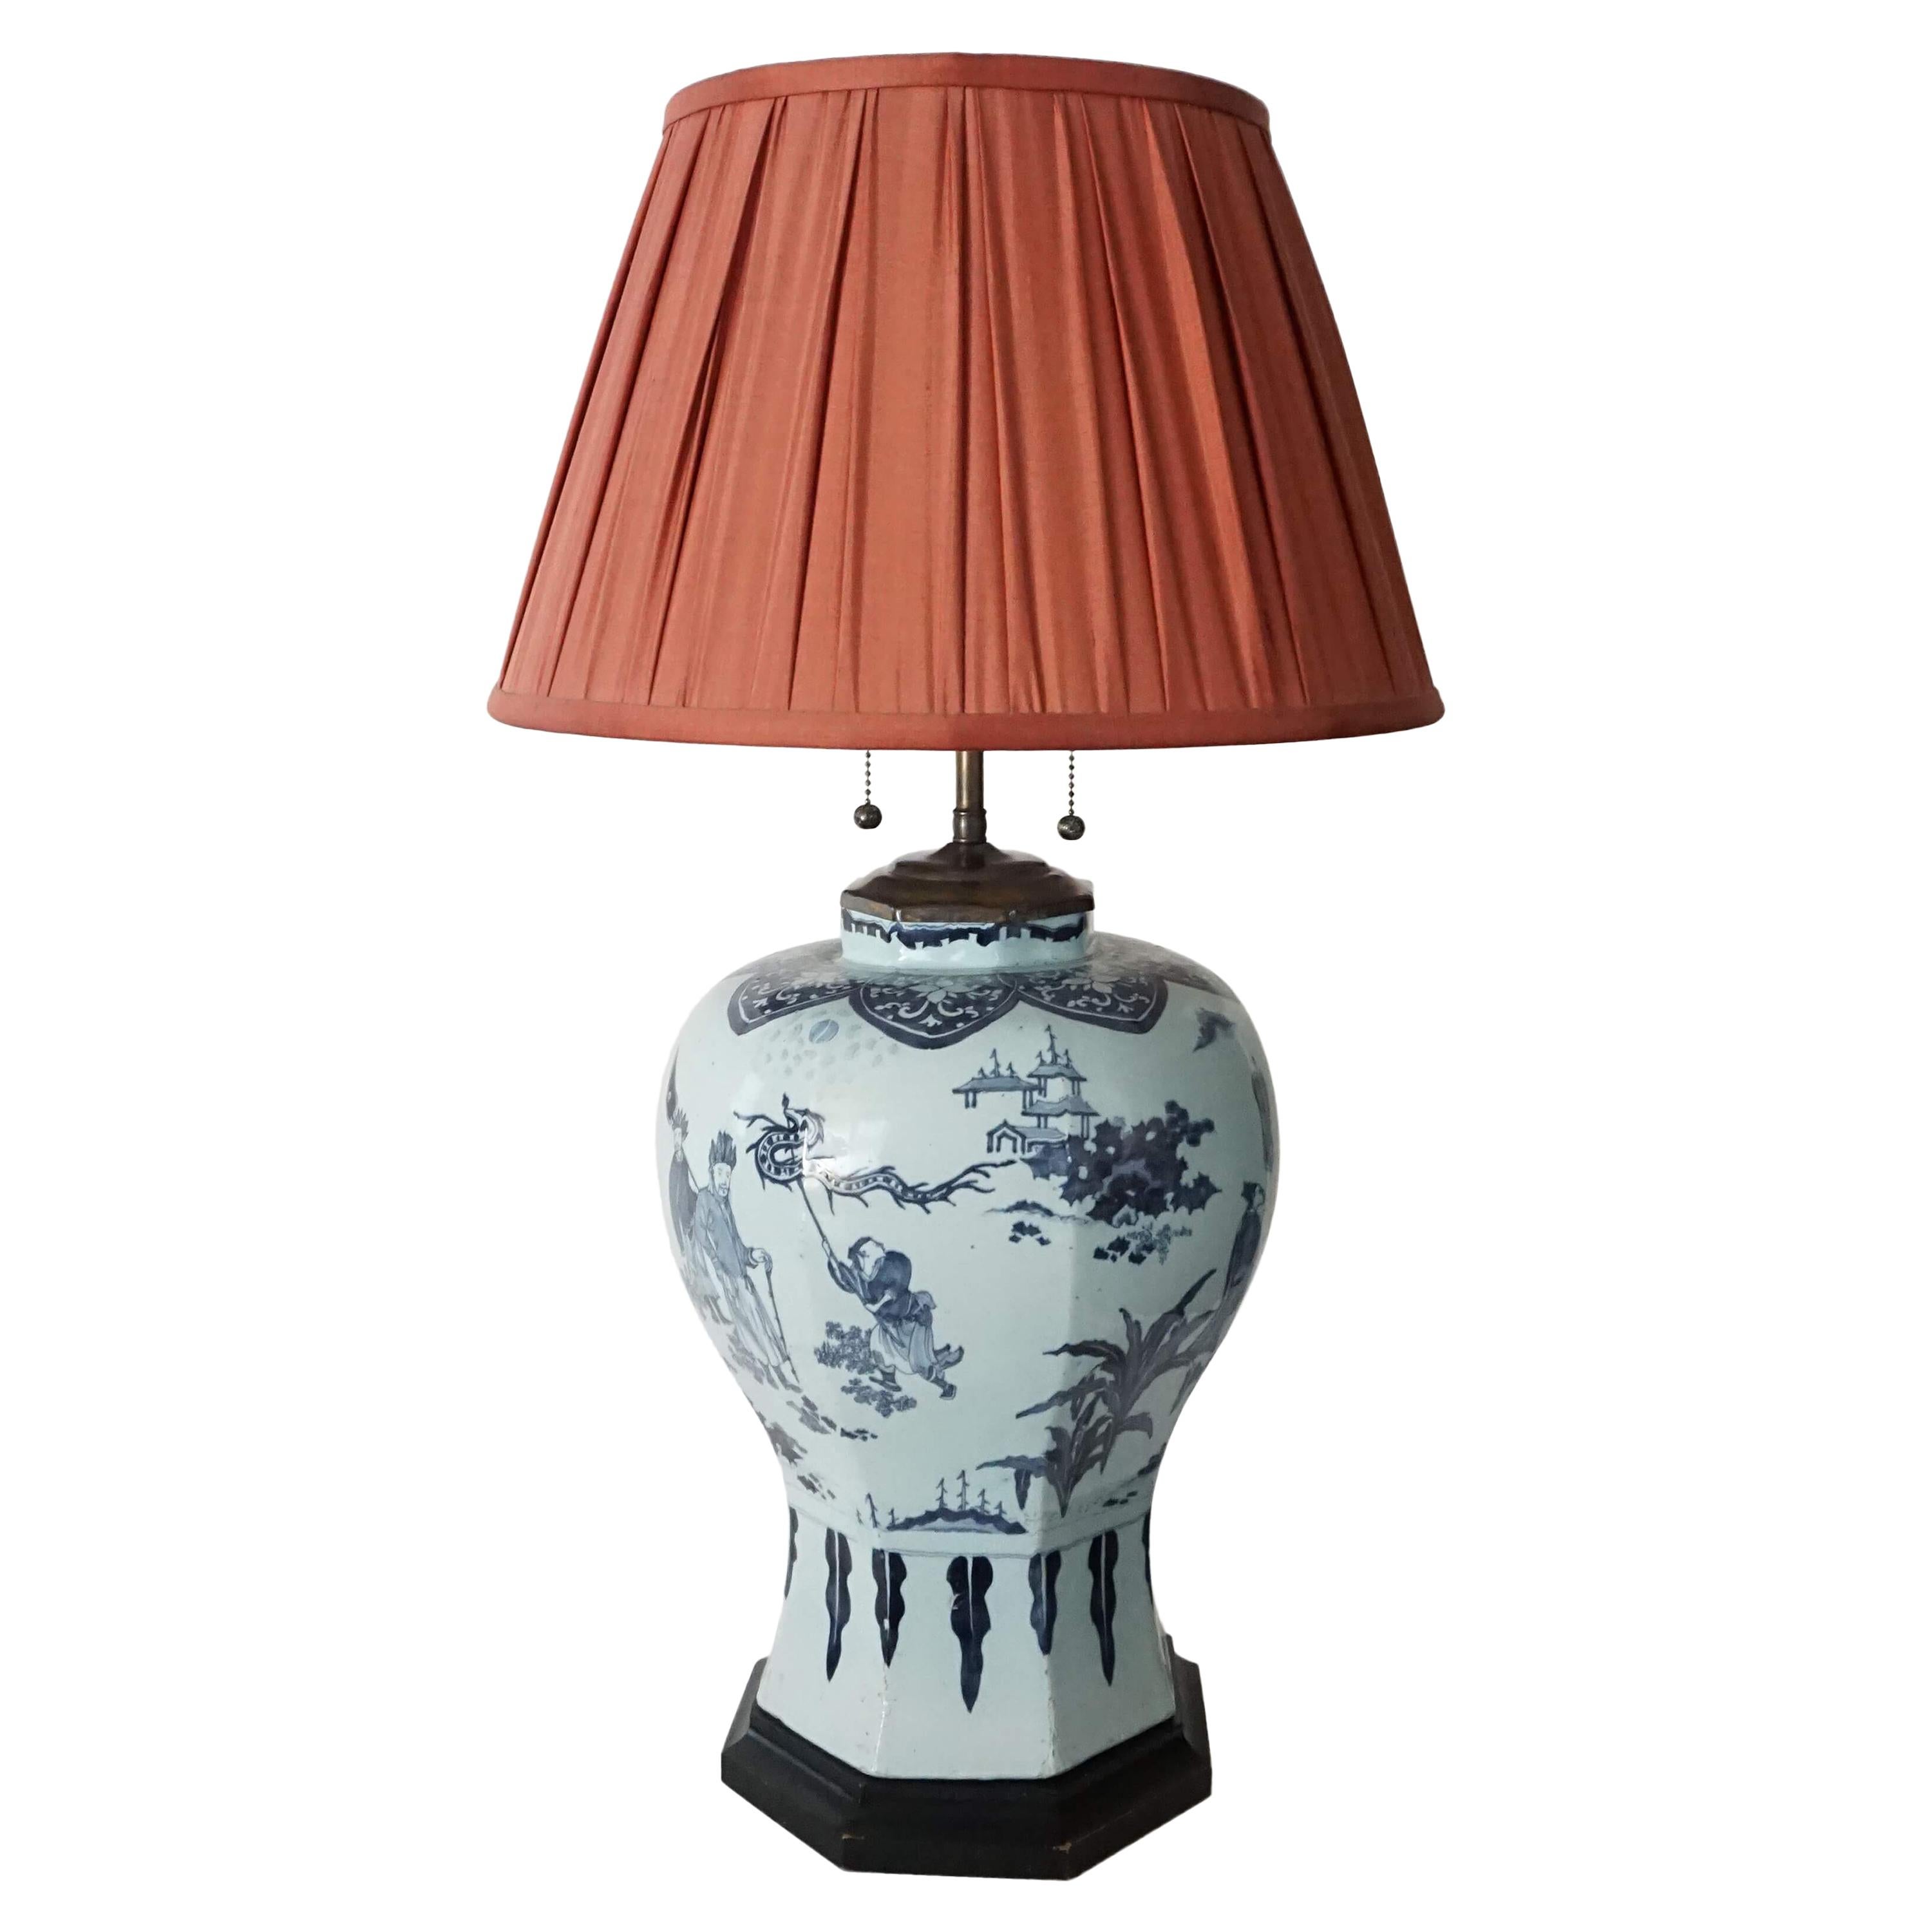 Blue and White Dutch Delft Chinoiserie Baluster Vase Table Lamp, circa 1670